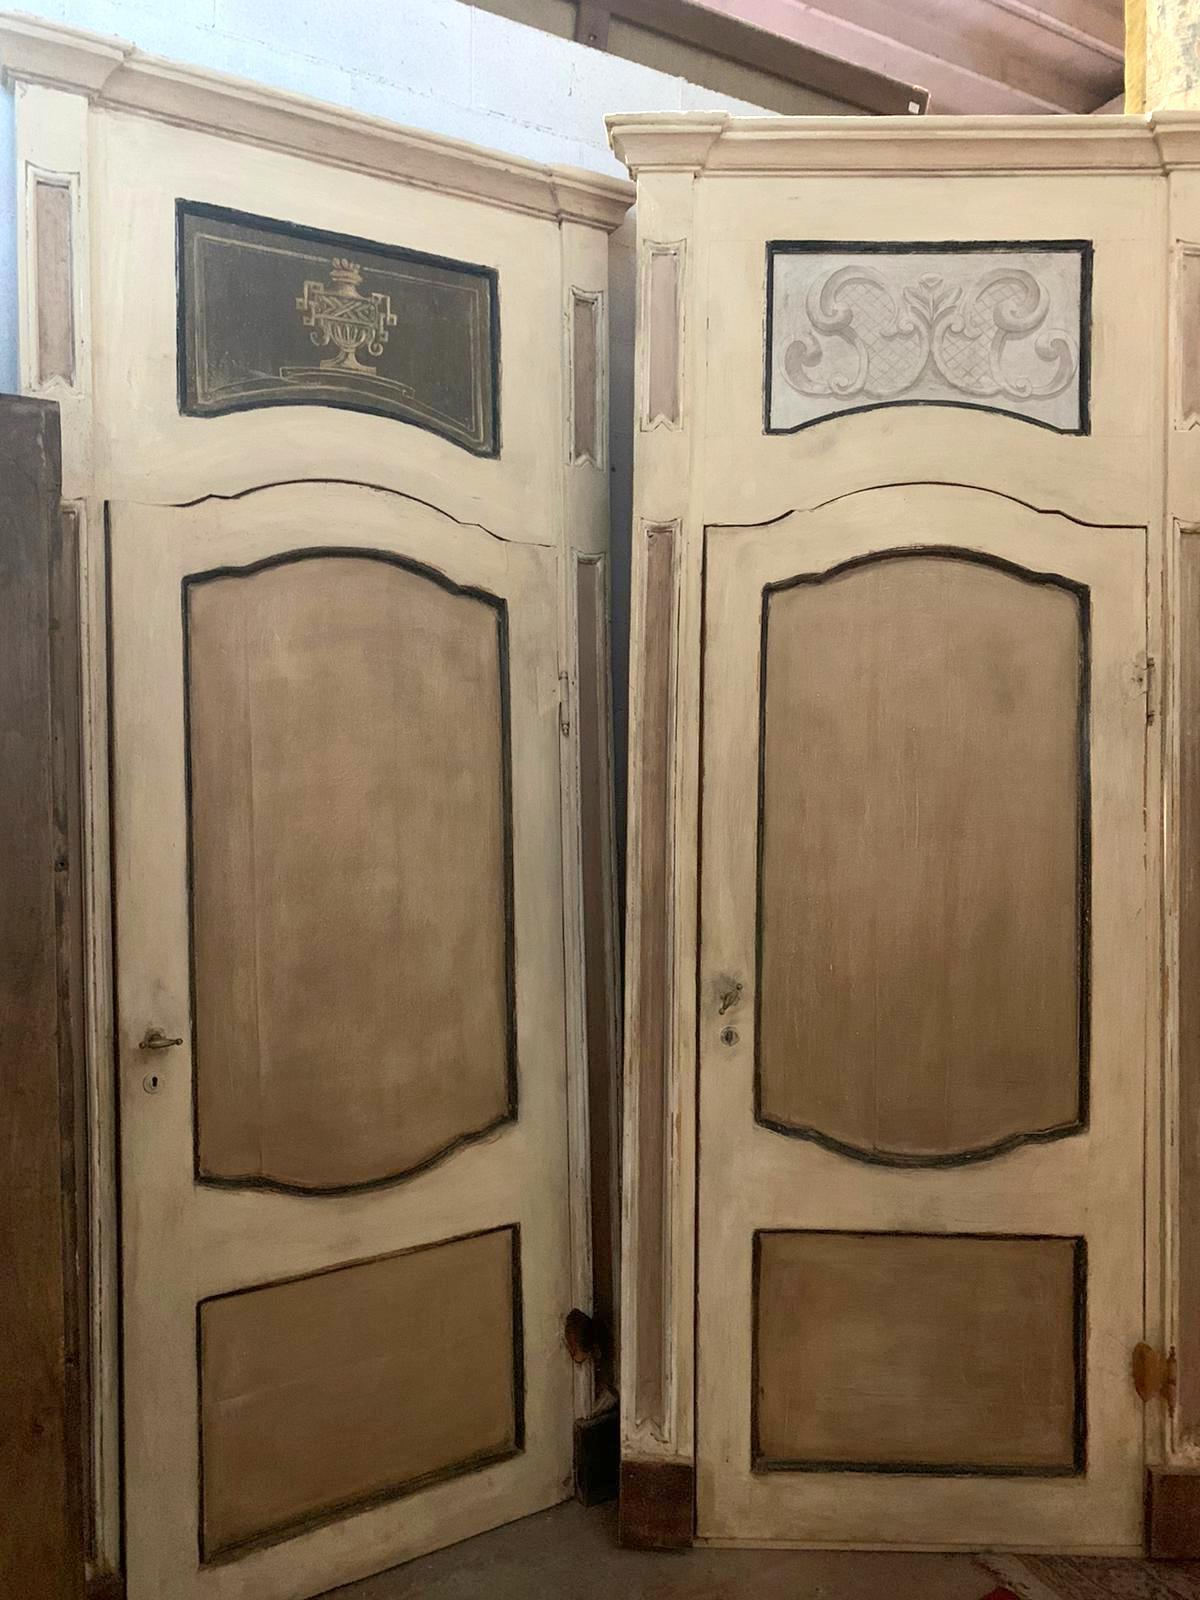 2 interior doors, hand painted with carved panels, lacquered frame, and complete with overdoor painted on canvas, built in the 18th century for a noble palace in Italy (Piedmont).
1. with frame cm L 114 x H 270, door light cm L 84 x H 202;
2. with